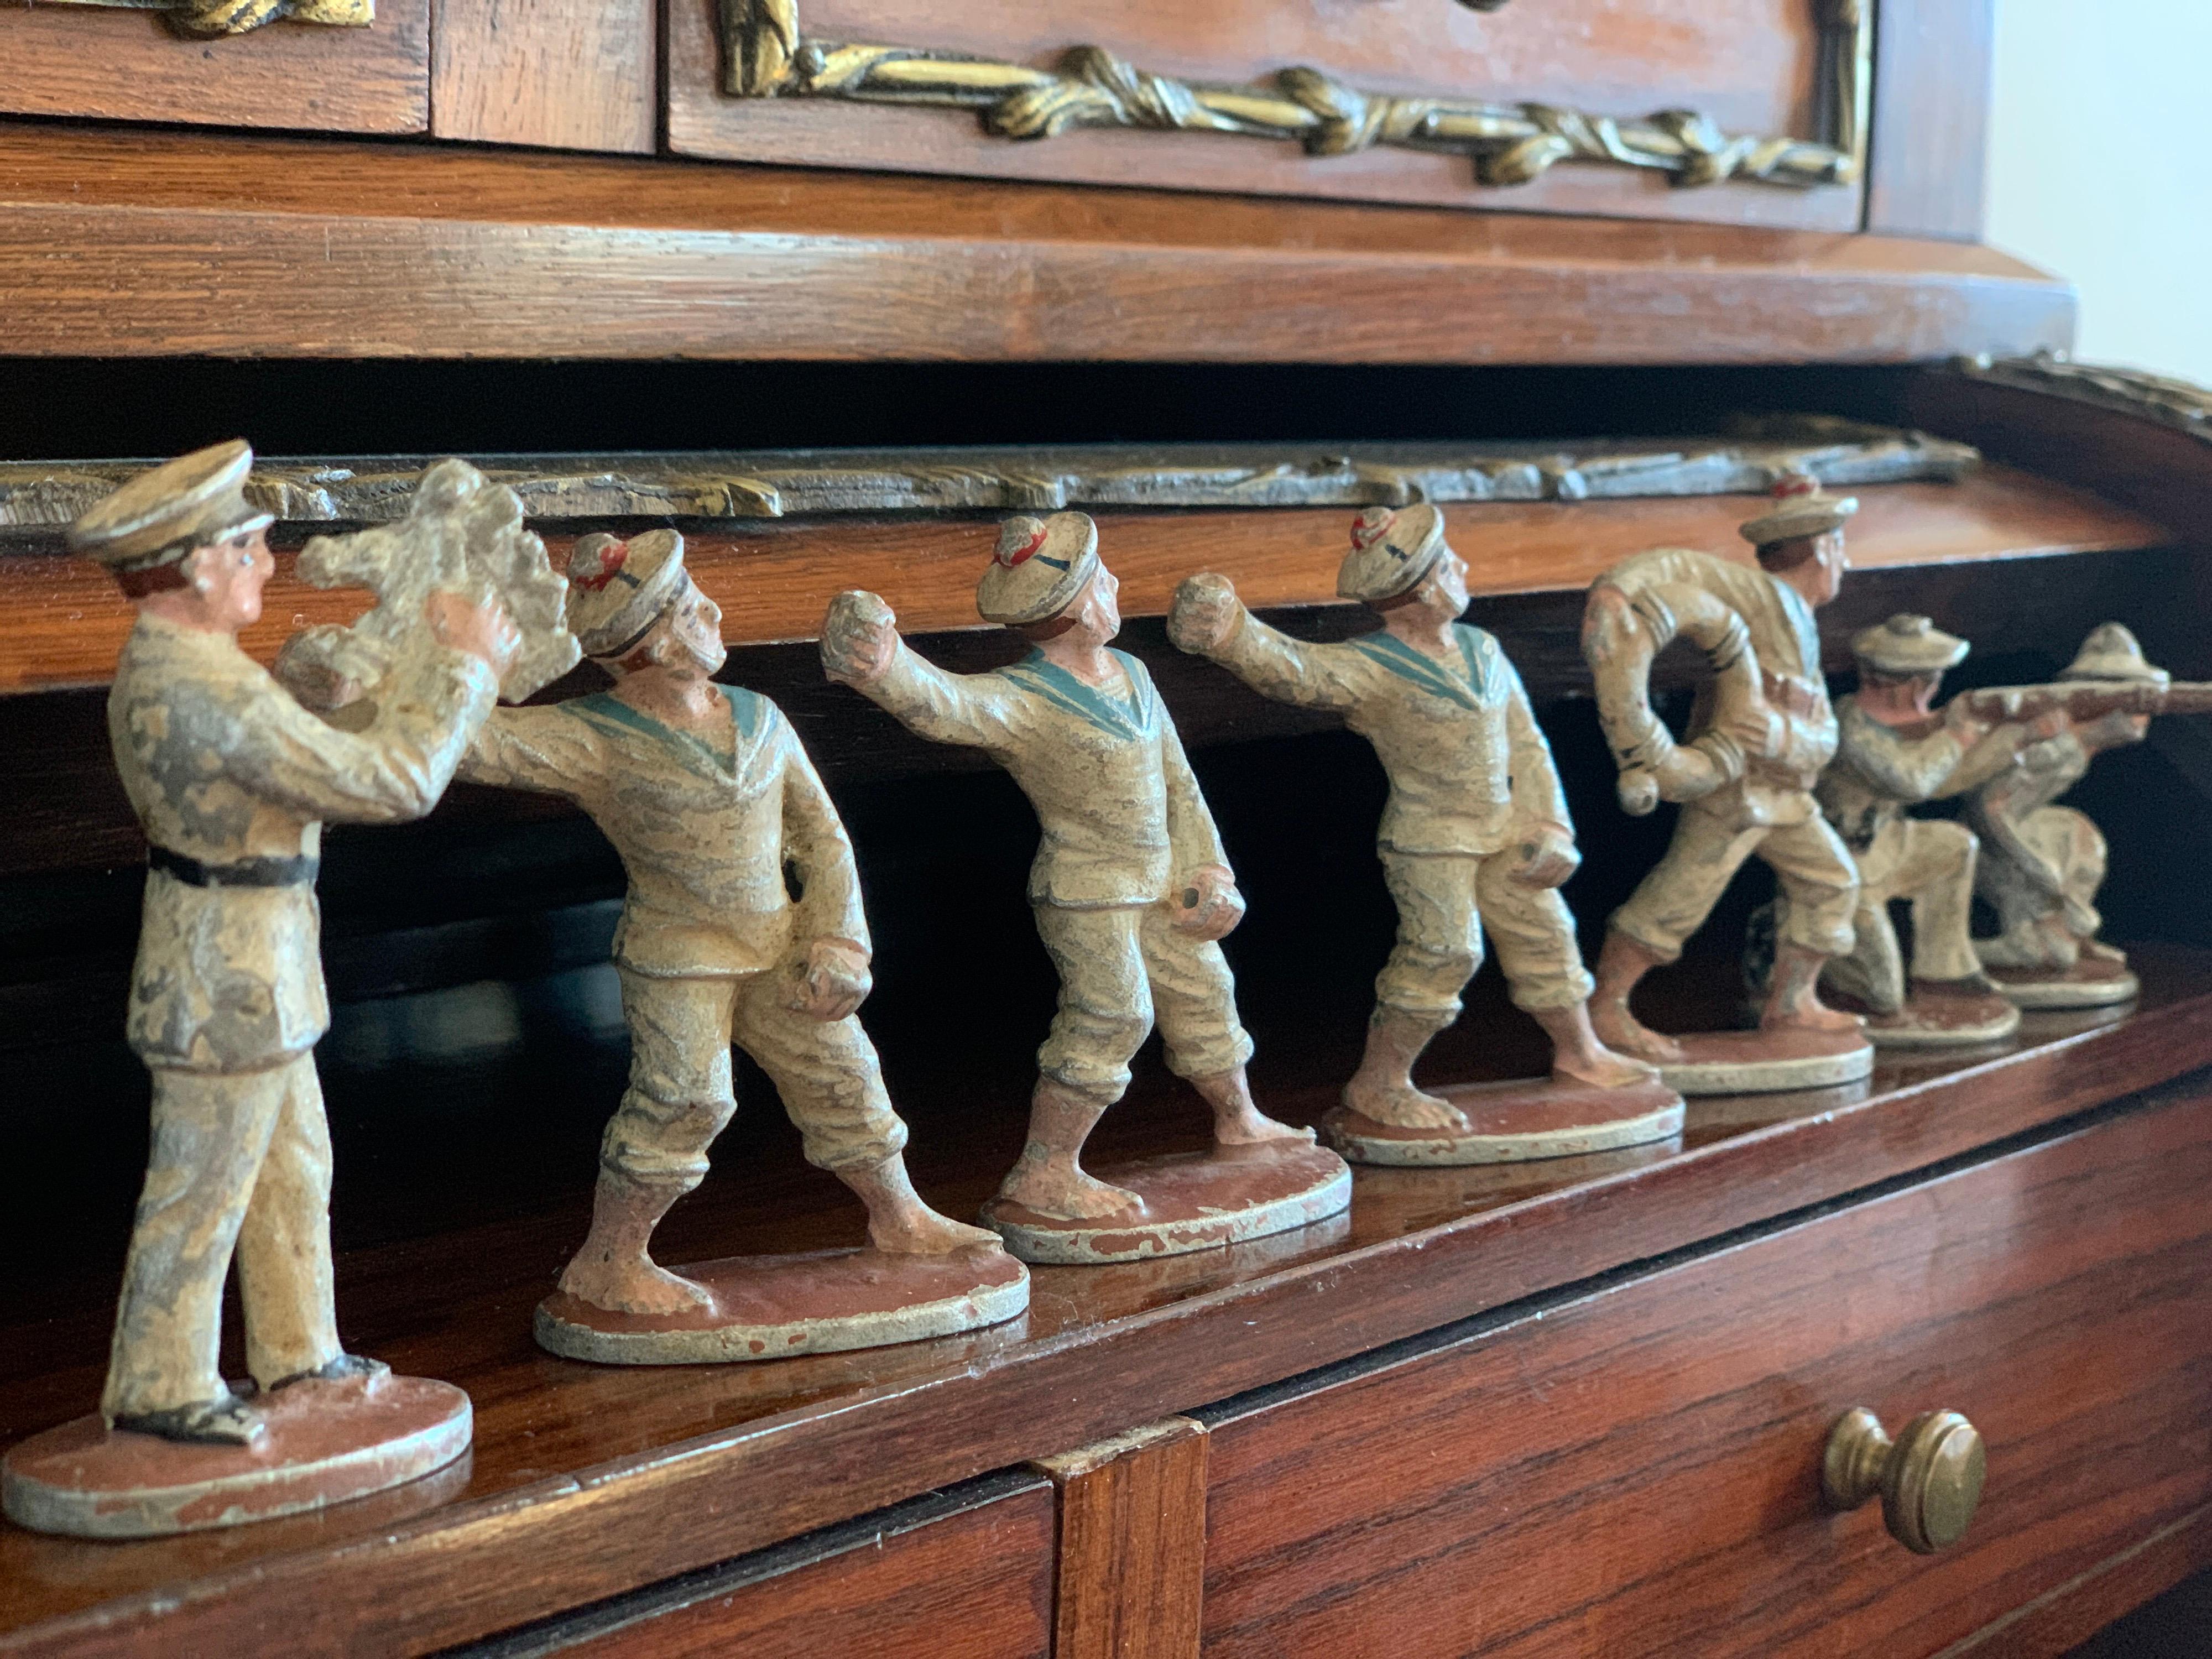 This collection contains seven marine soldiers in various poses with typical uniforms. All figures are hand painted and are standing on their own base. Circa 1940.